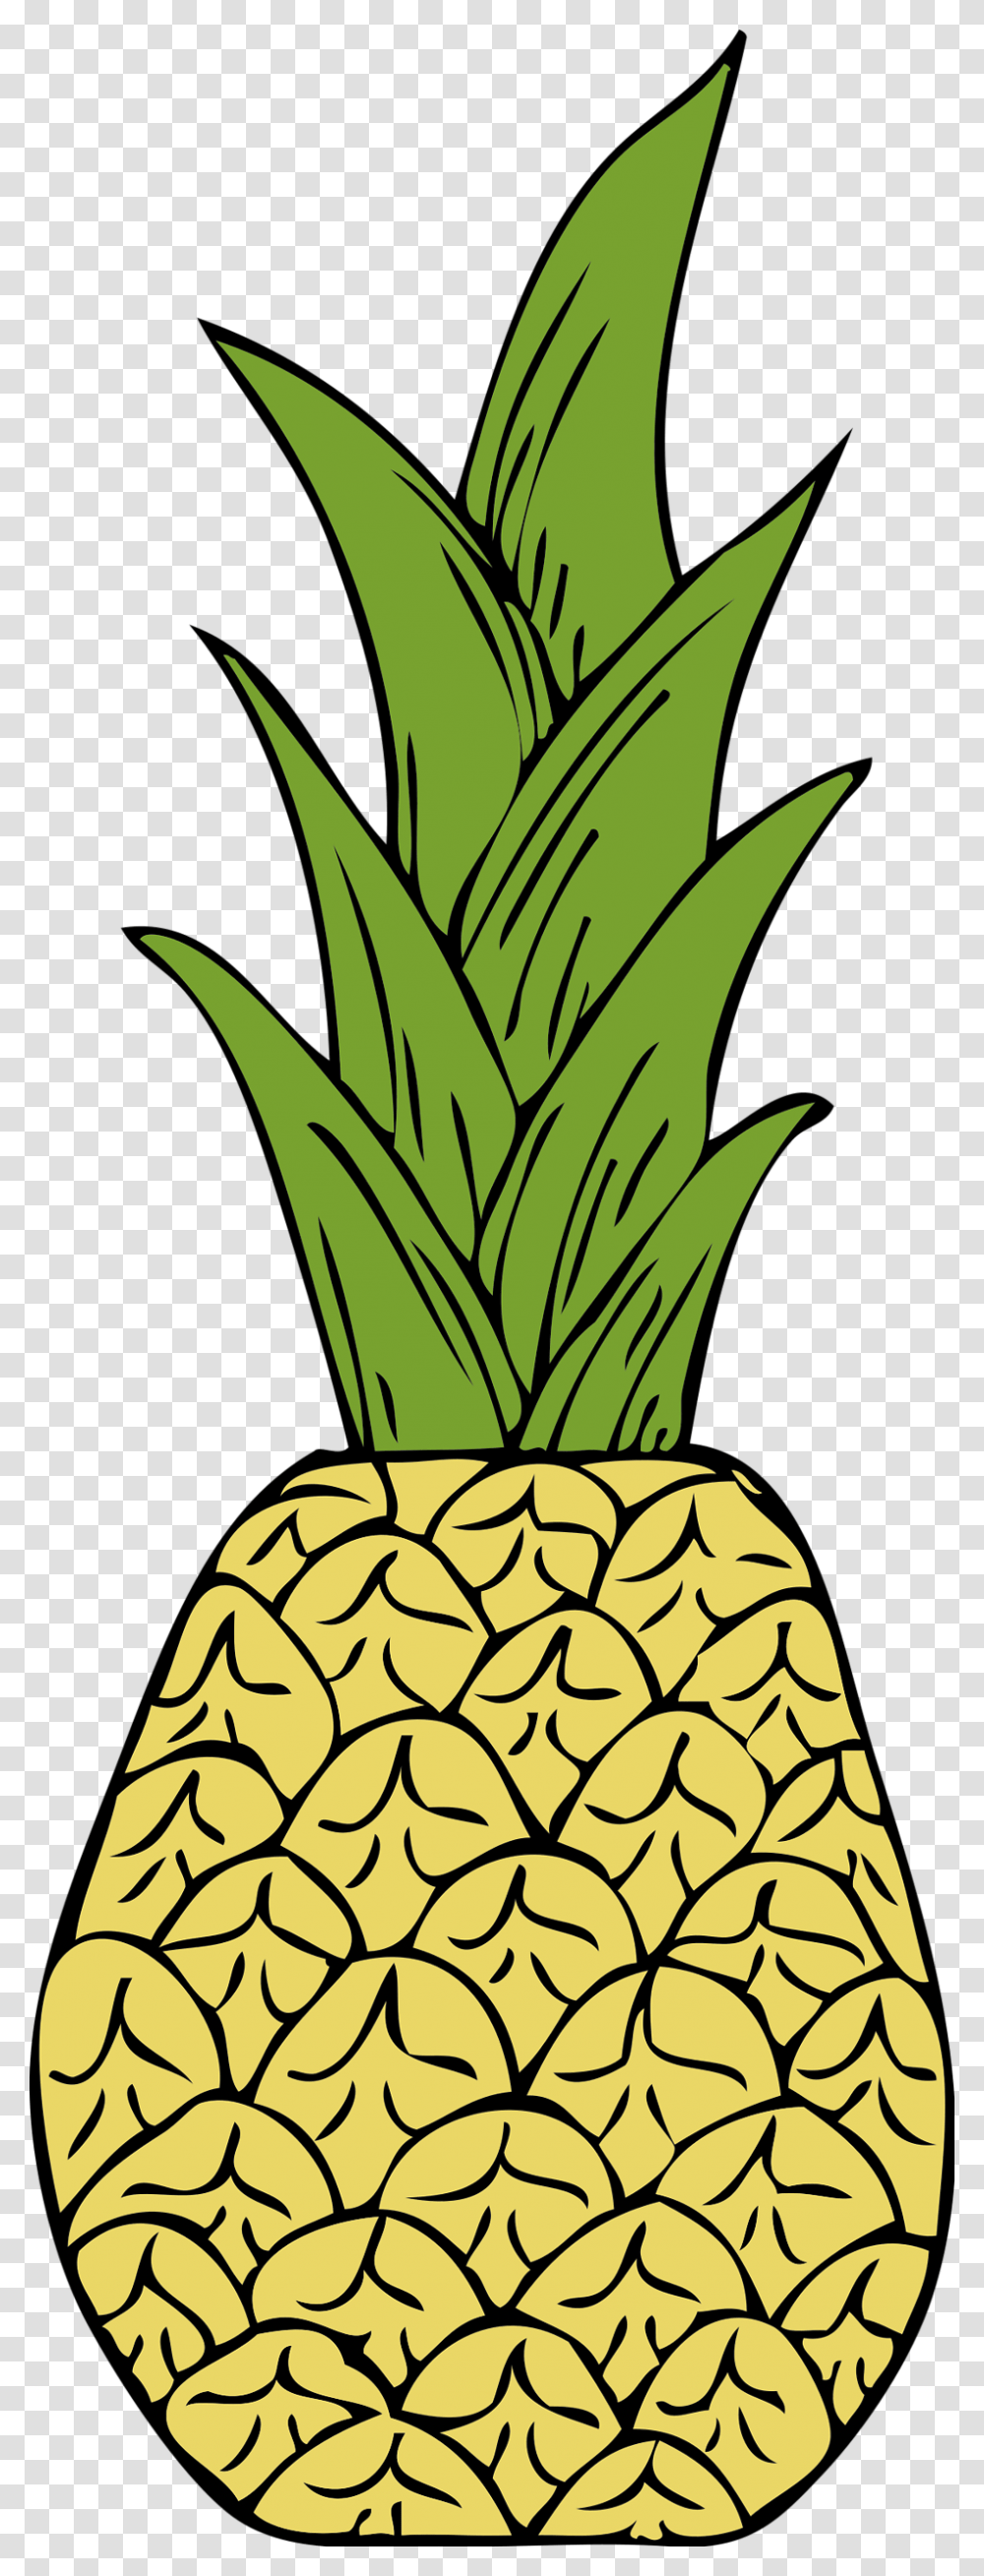 Pineapple Drawing Clip Art Pineapple Tumblr, Fruit, Plant, Food, Produce Transparent Png